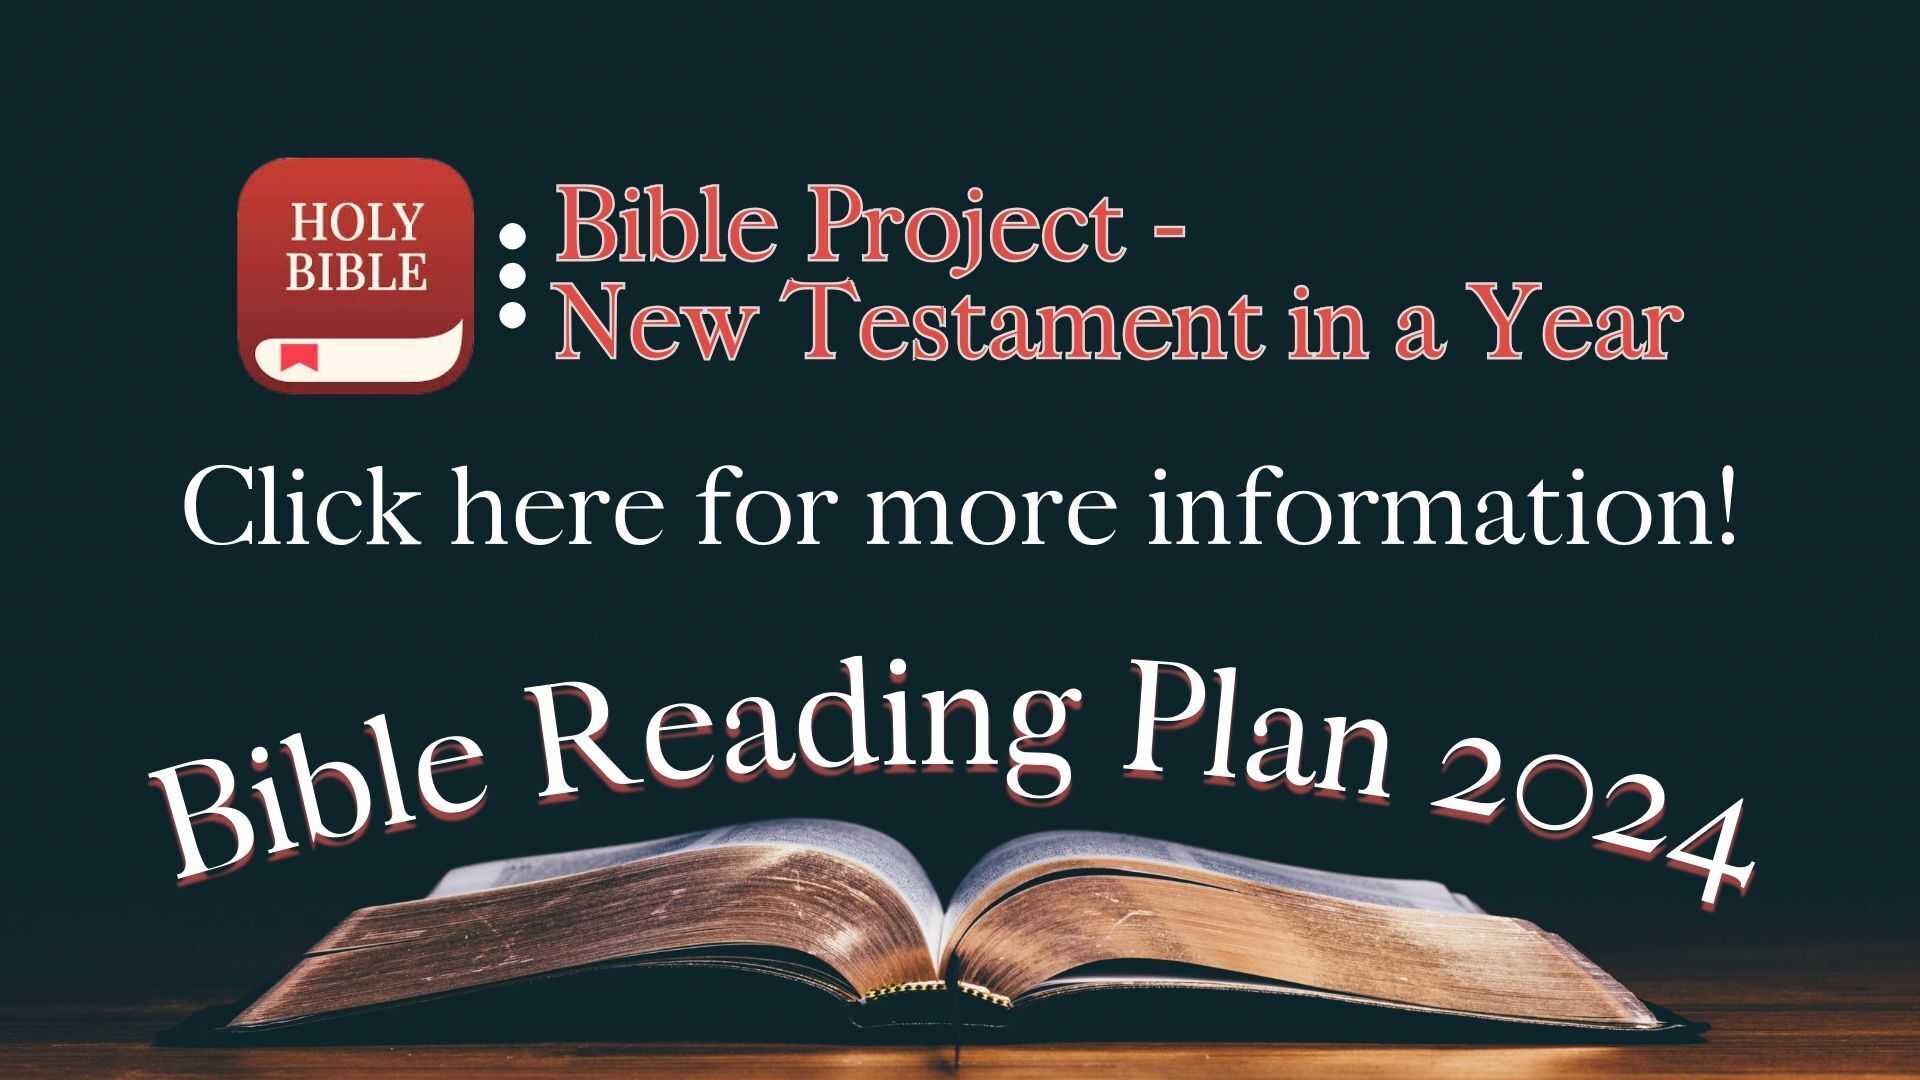 Bible Reading Plan 2024 - Click here for more